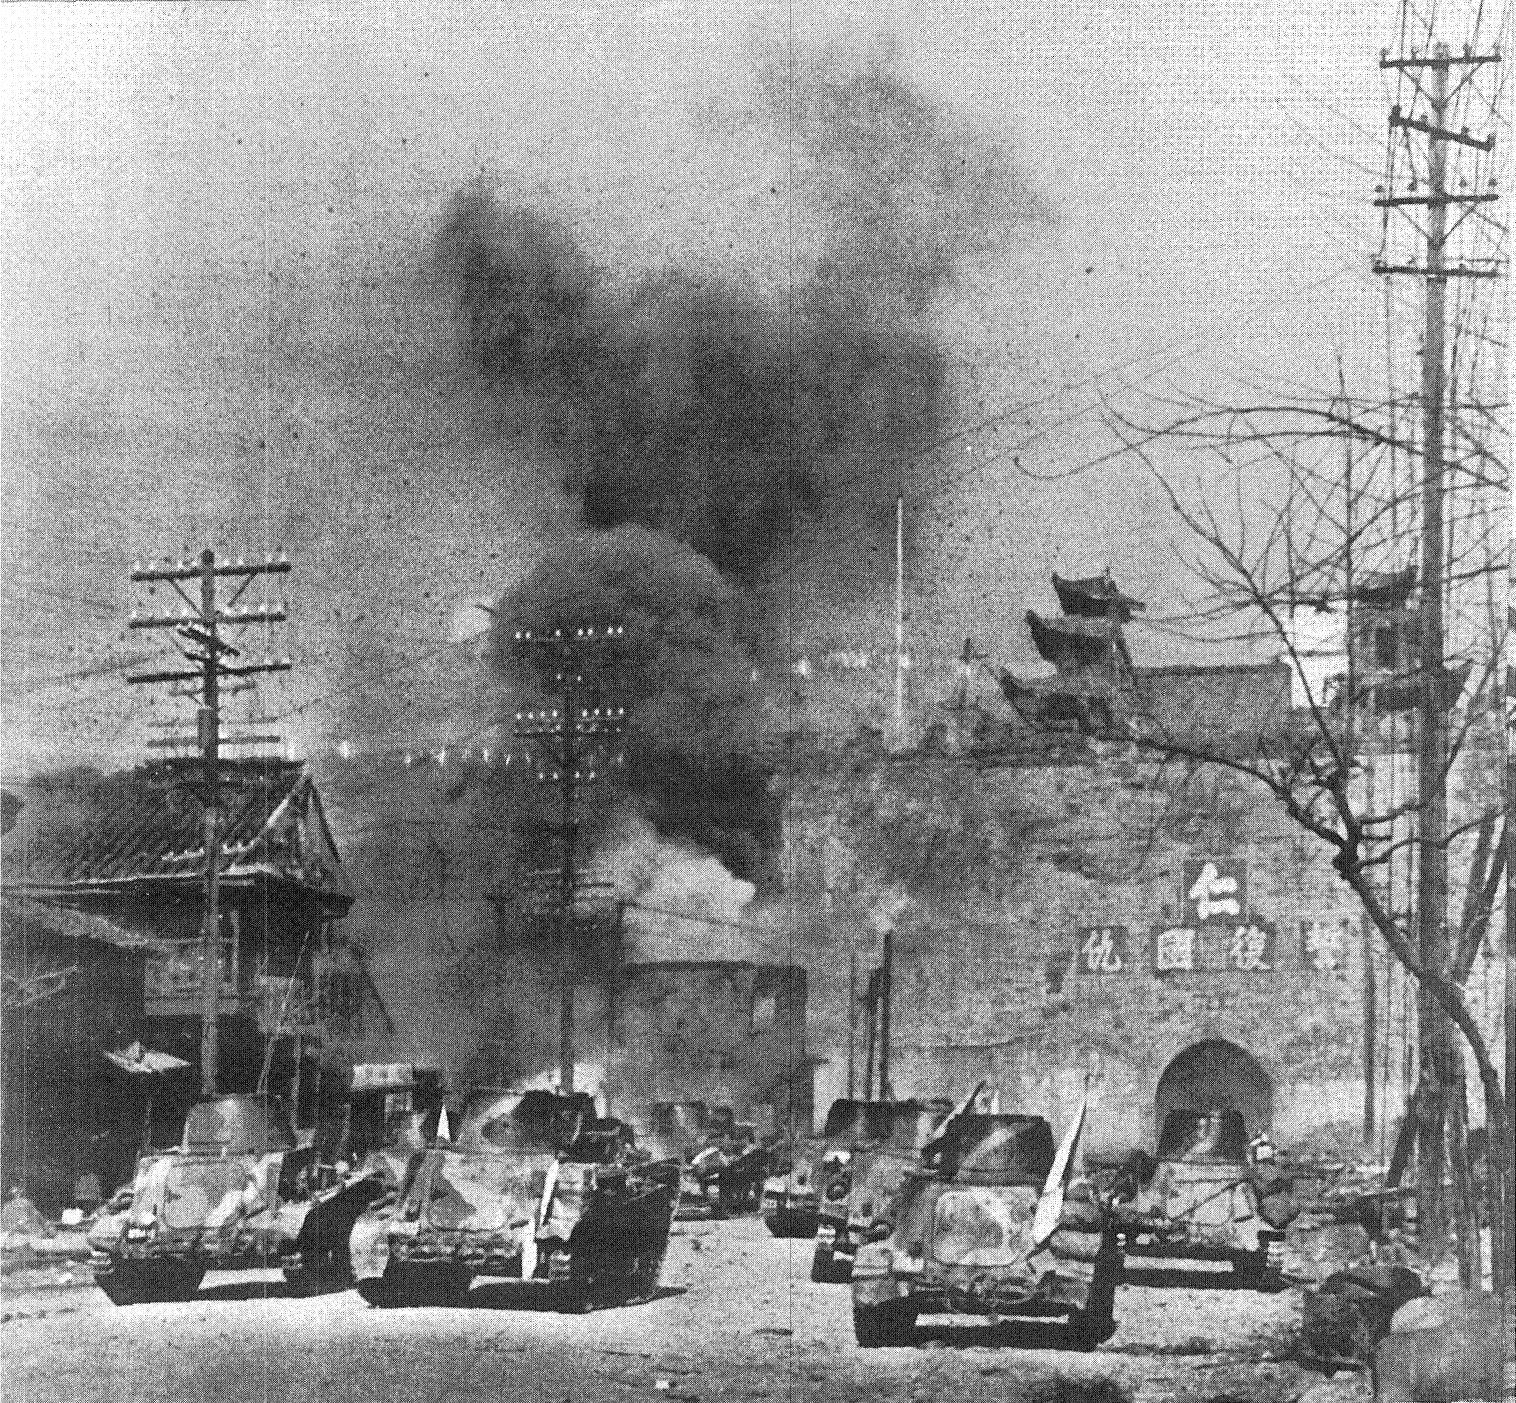 Japanese Type 94 tankettes attacking the Zhonghua Gate of the Nanjing city wall, China, 12 Dec 1937